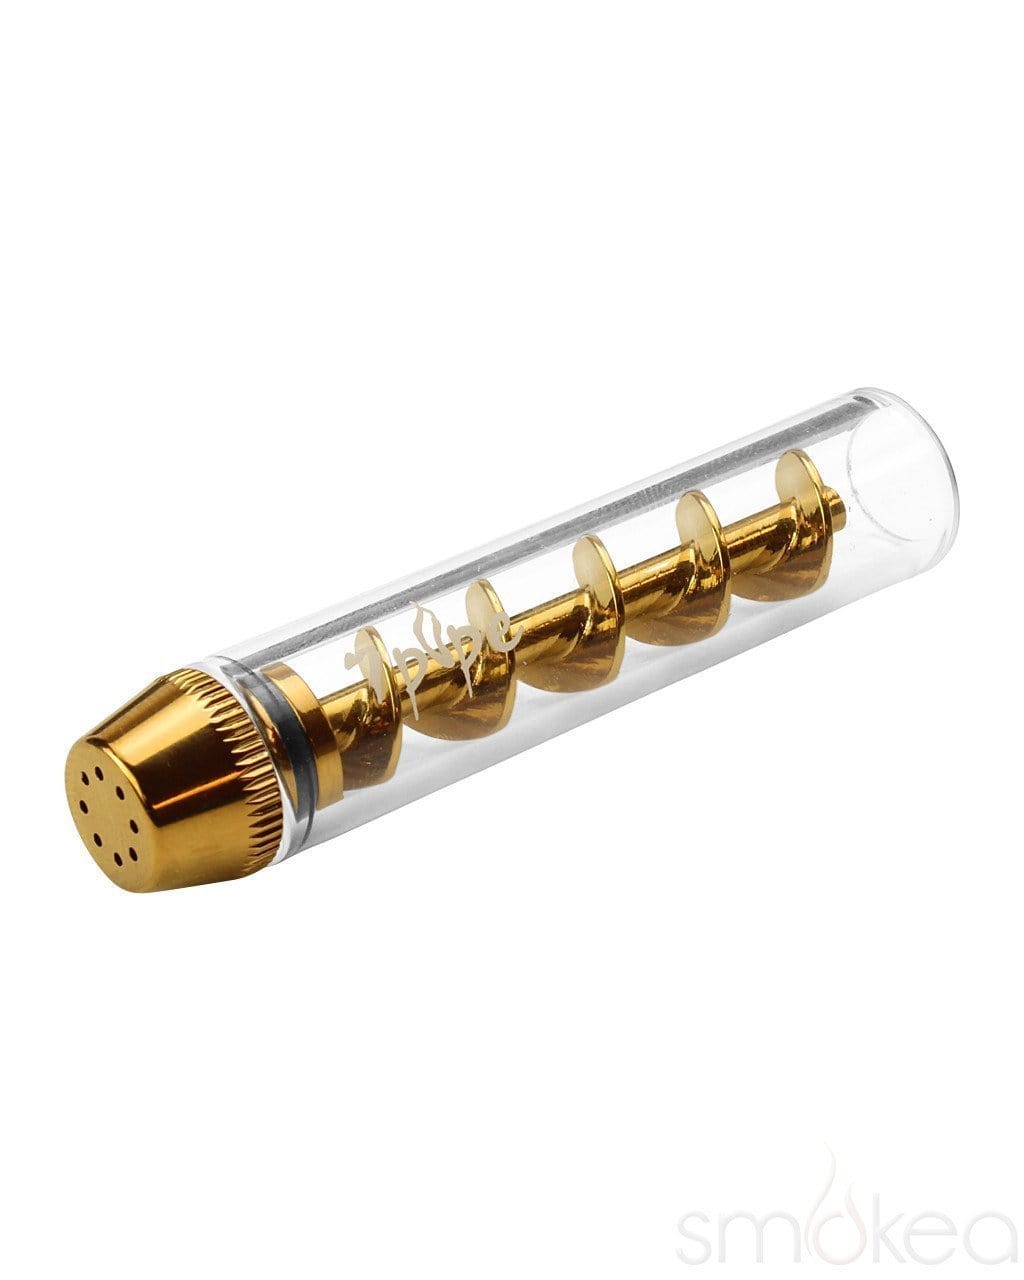 Infinite Glass Twisty Blunt 5.5 Inches With Silicone Cap